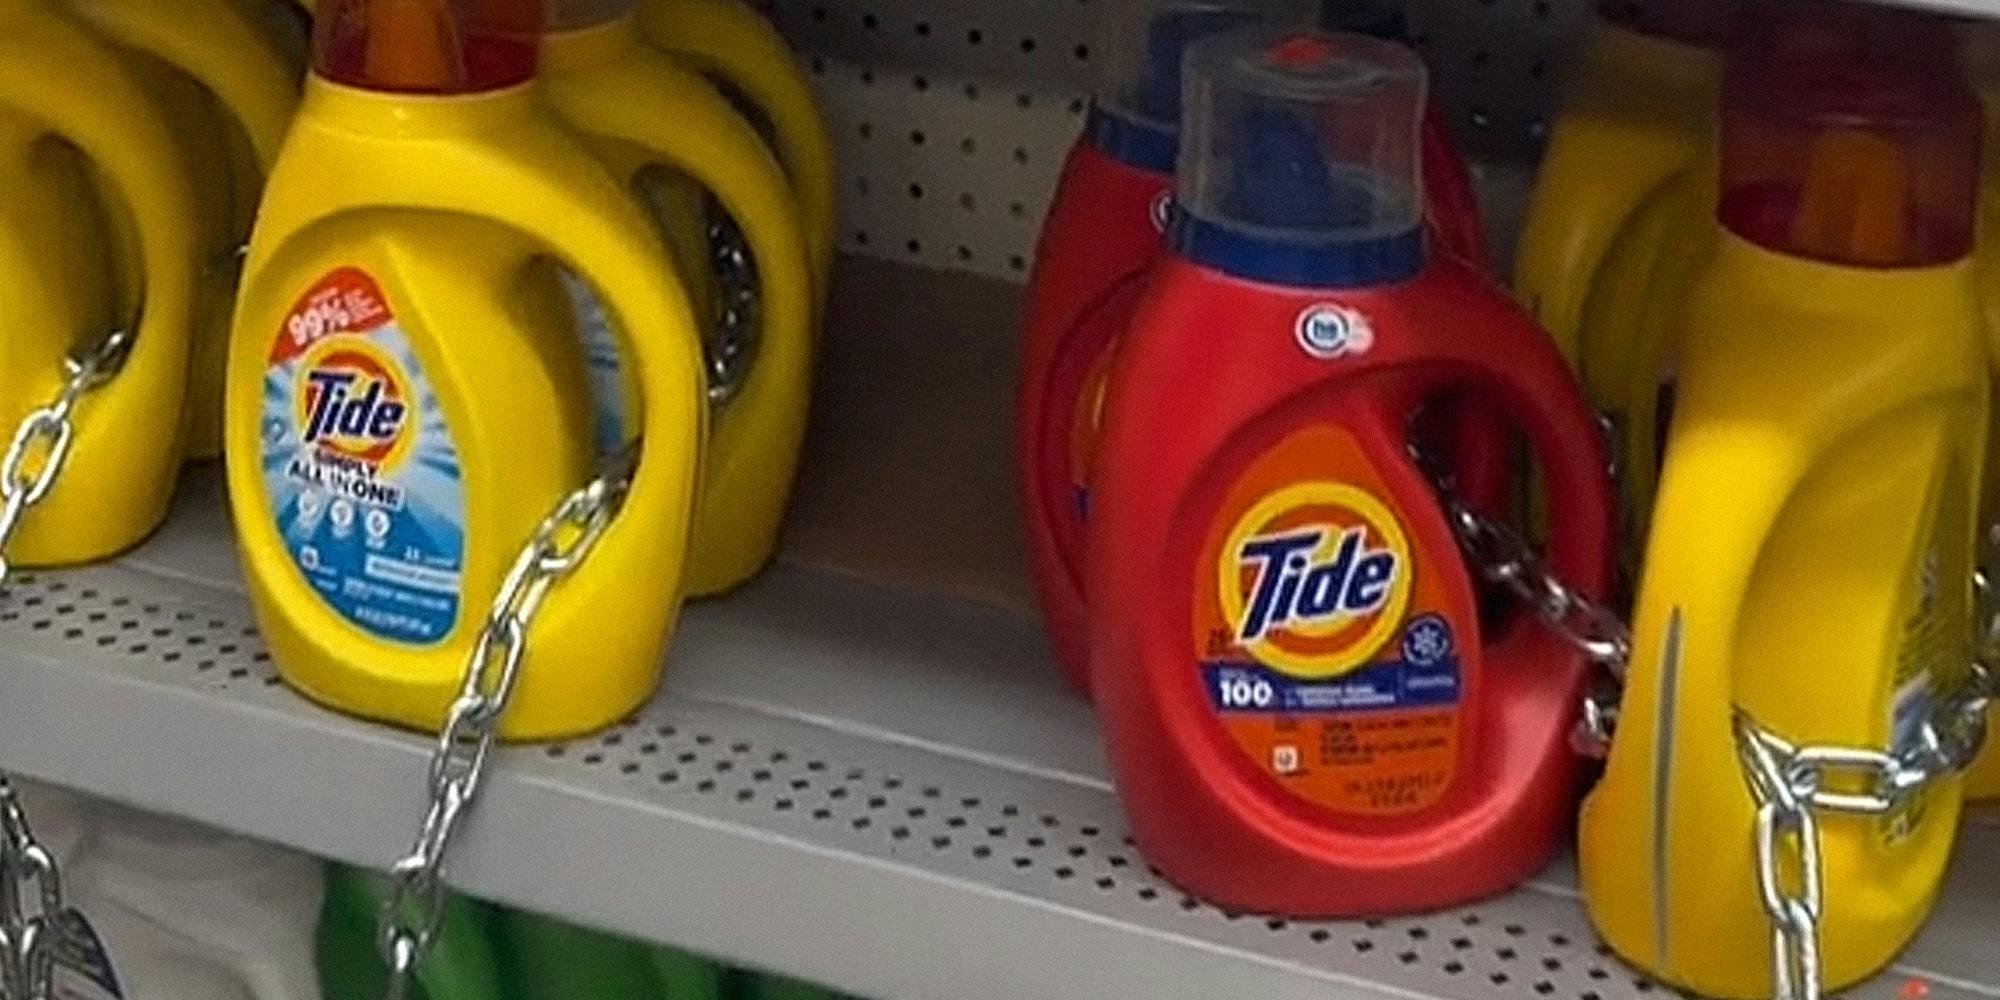 'I refuse to shop like this': Grocery store shopper finds laundry detergent chained up to shelves